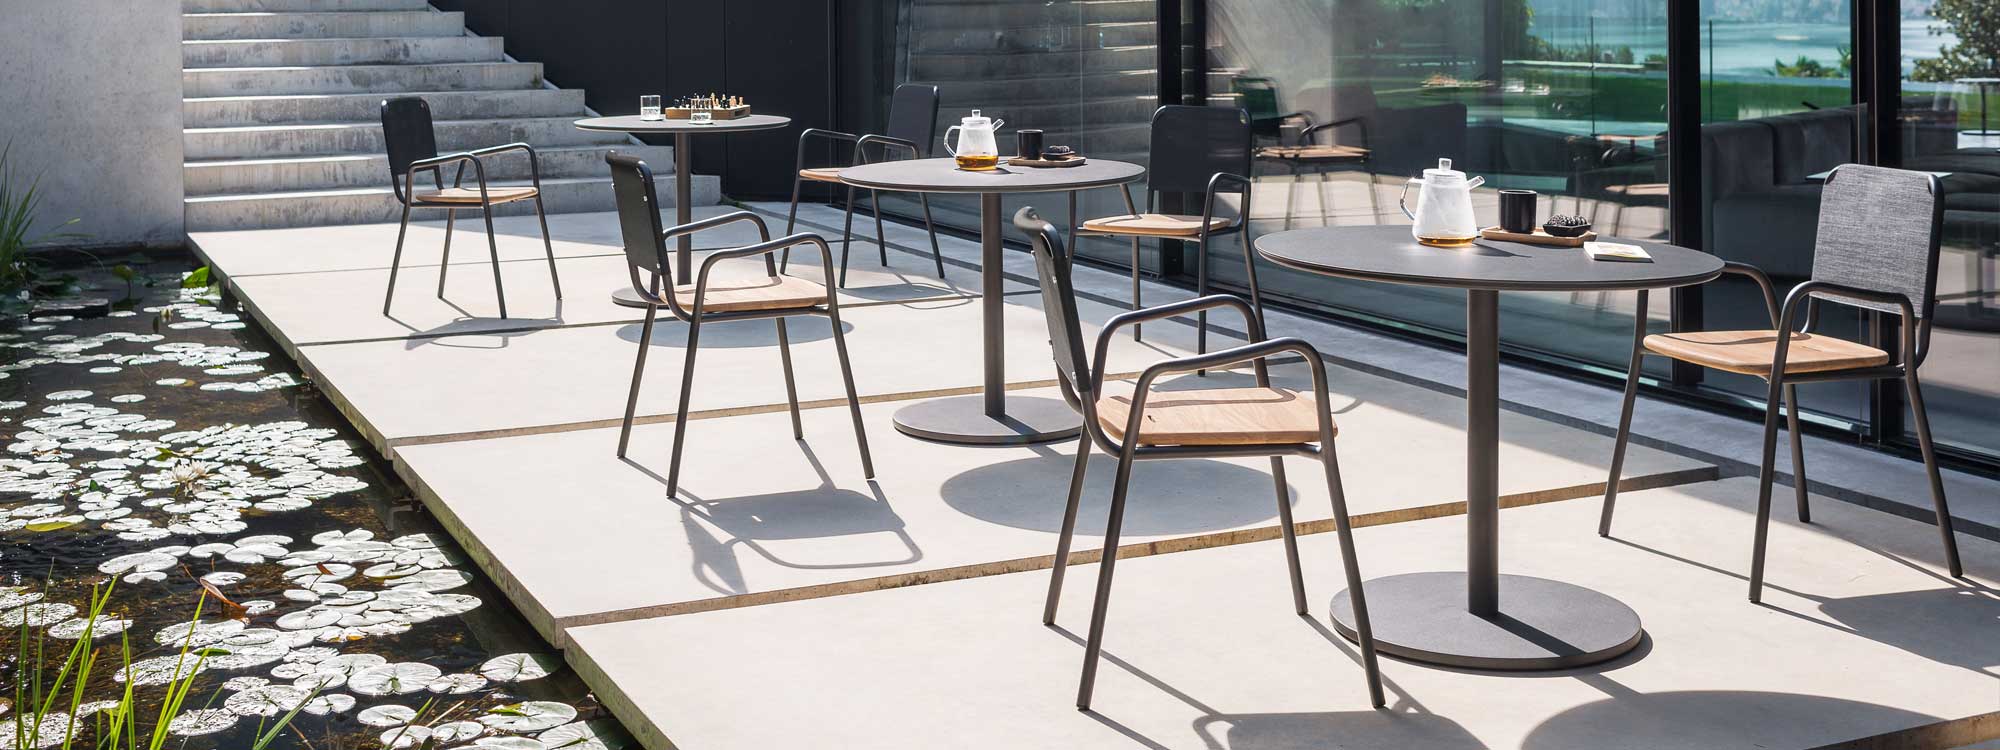 Image of 3 Stem bistro tables and Guest modern dining chairs by RODA on terrace next to calm water feature with water lillies